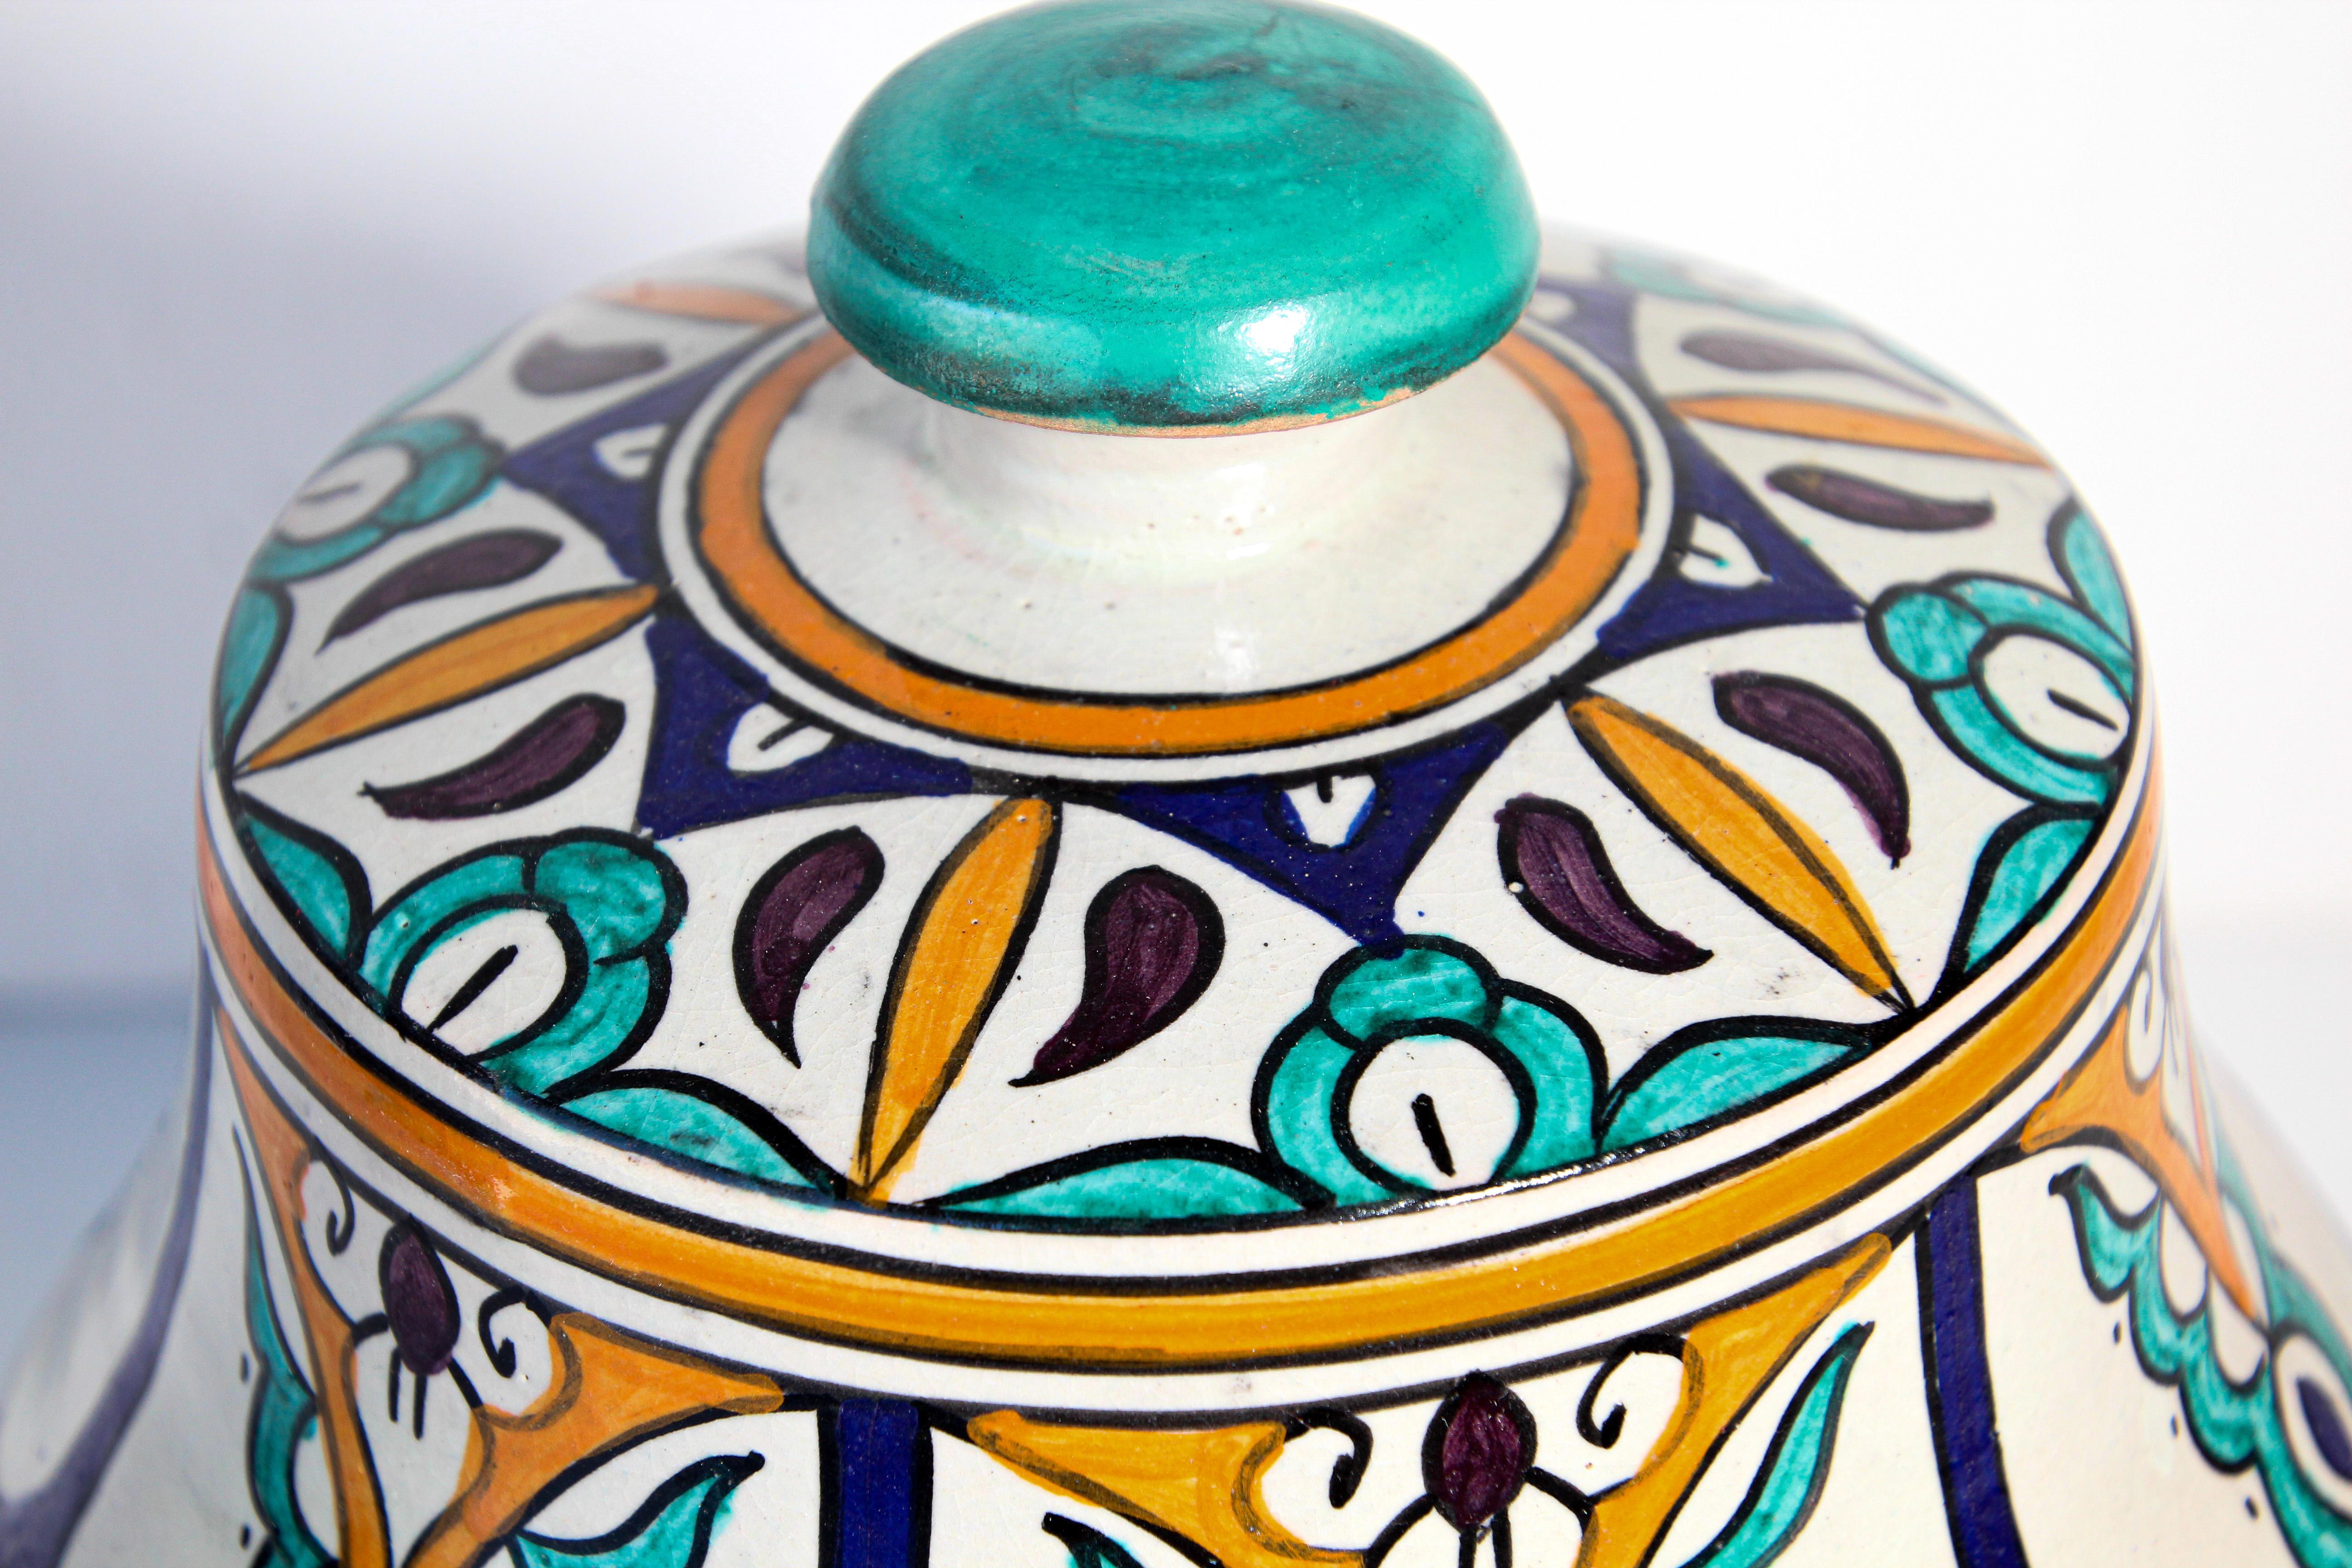 Moorish Ceramic Glazed Covered Jars Handcrafted in Fez Morocco For Sale 1